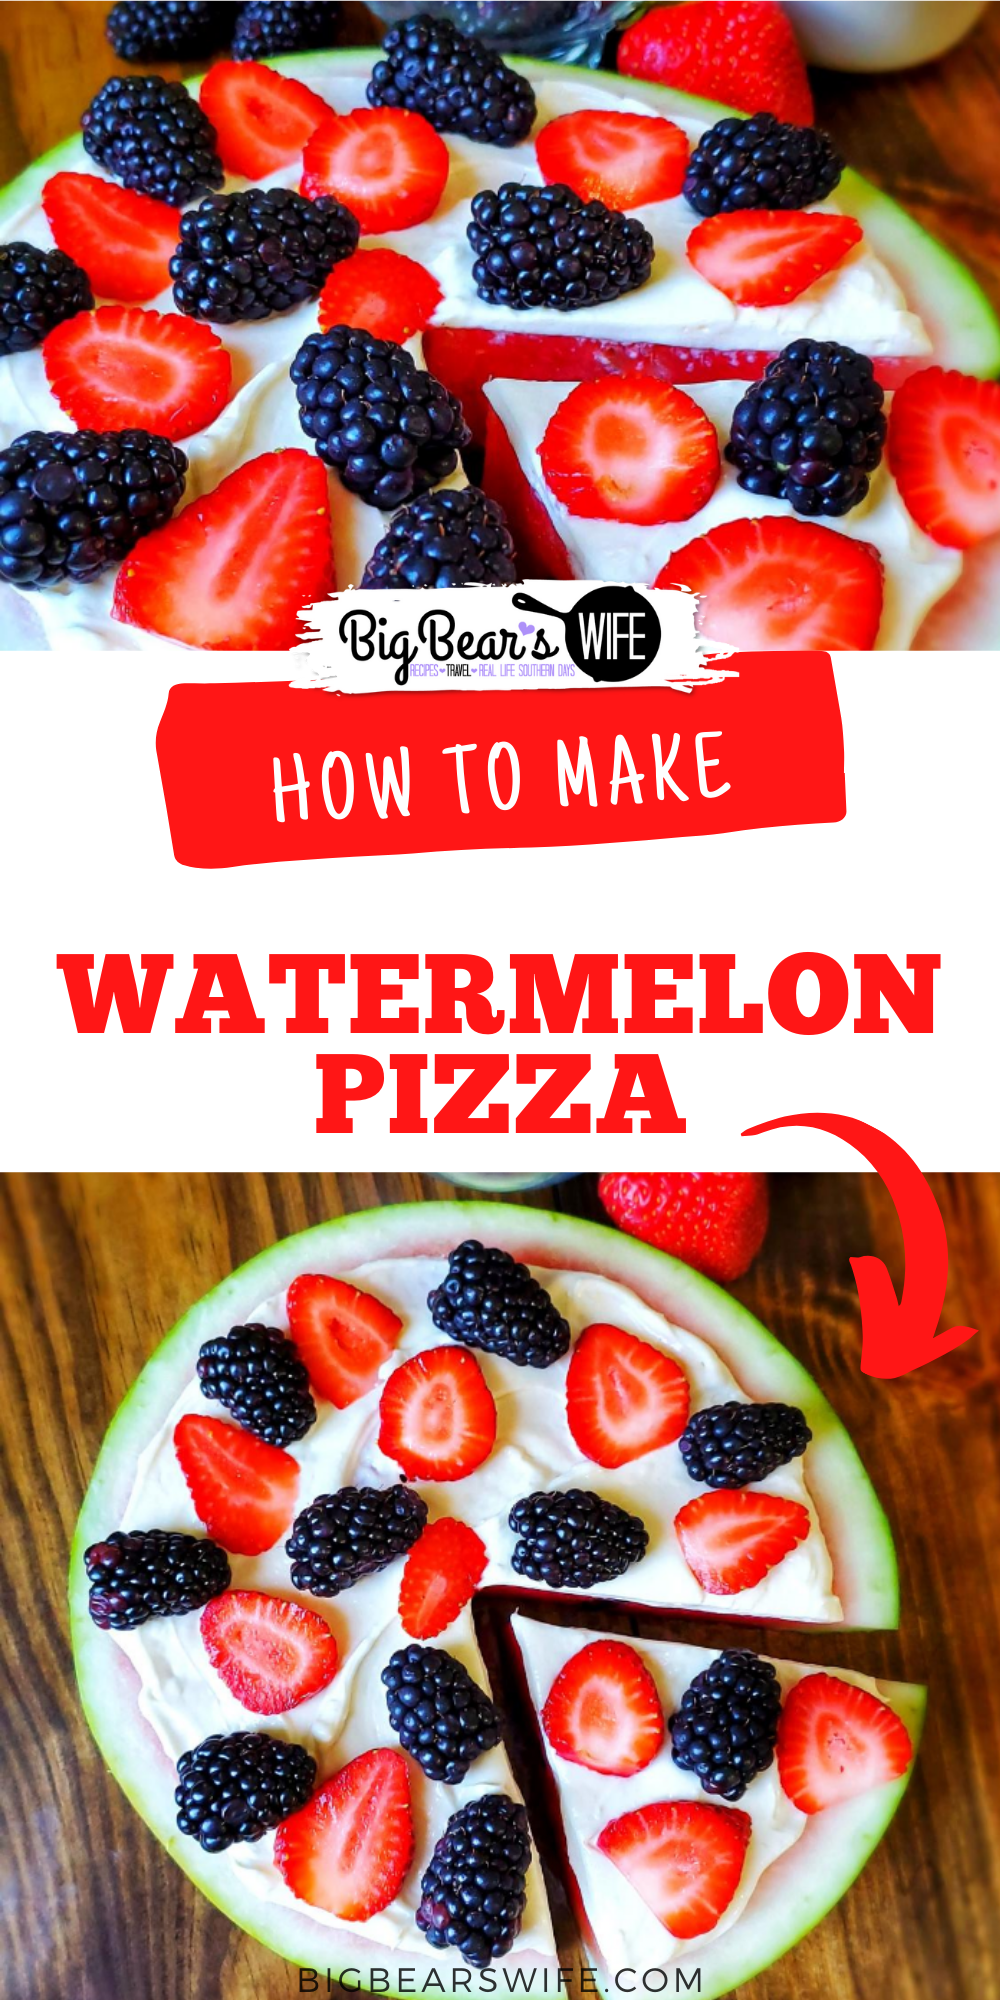 Looking for an easy summer dessert? Need to use up some watermelon from the cookout? Try this Watermelon Pizza that's easy to make and totally customizable! via @bigbearswife